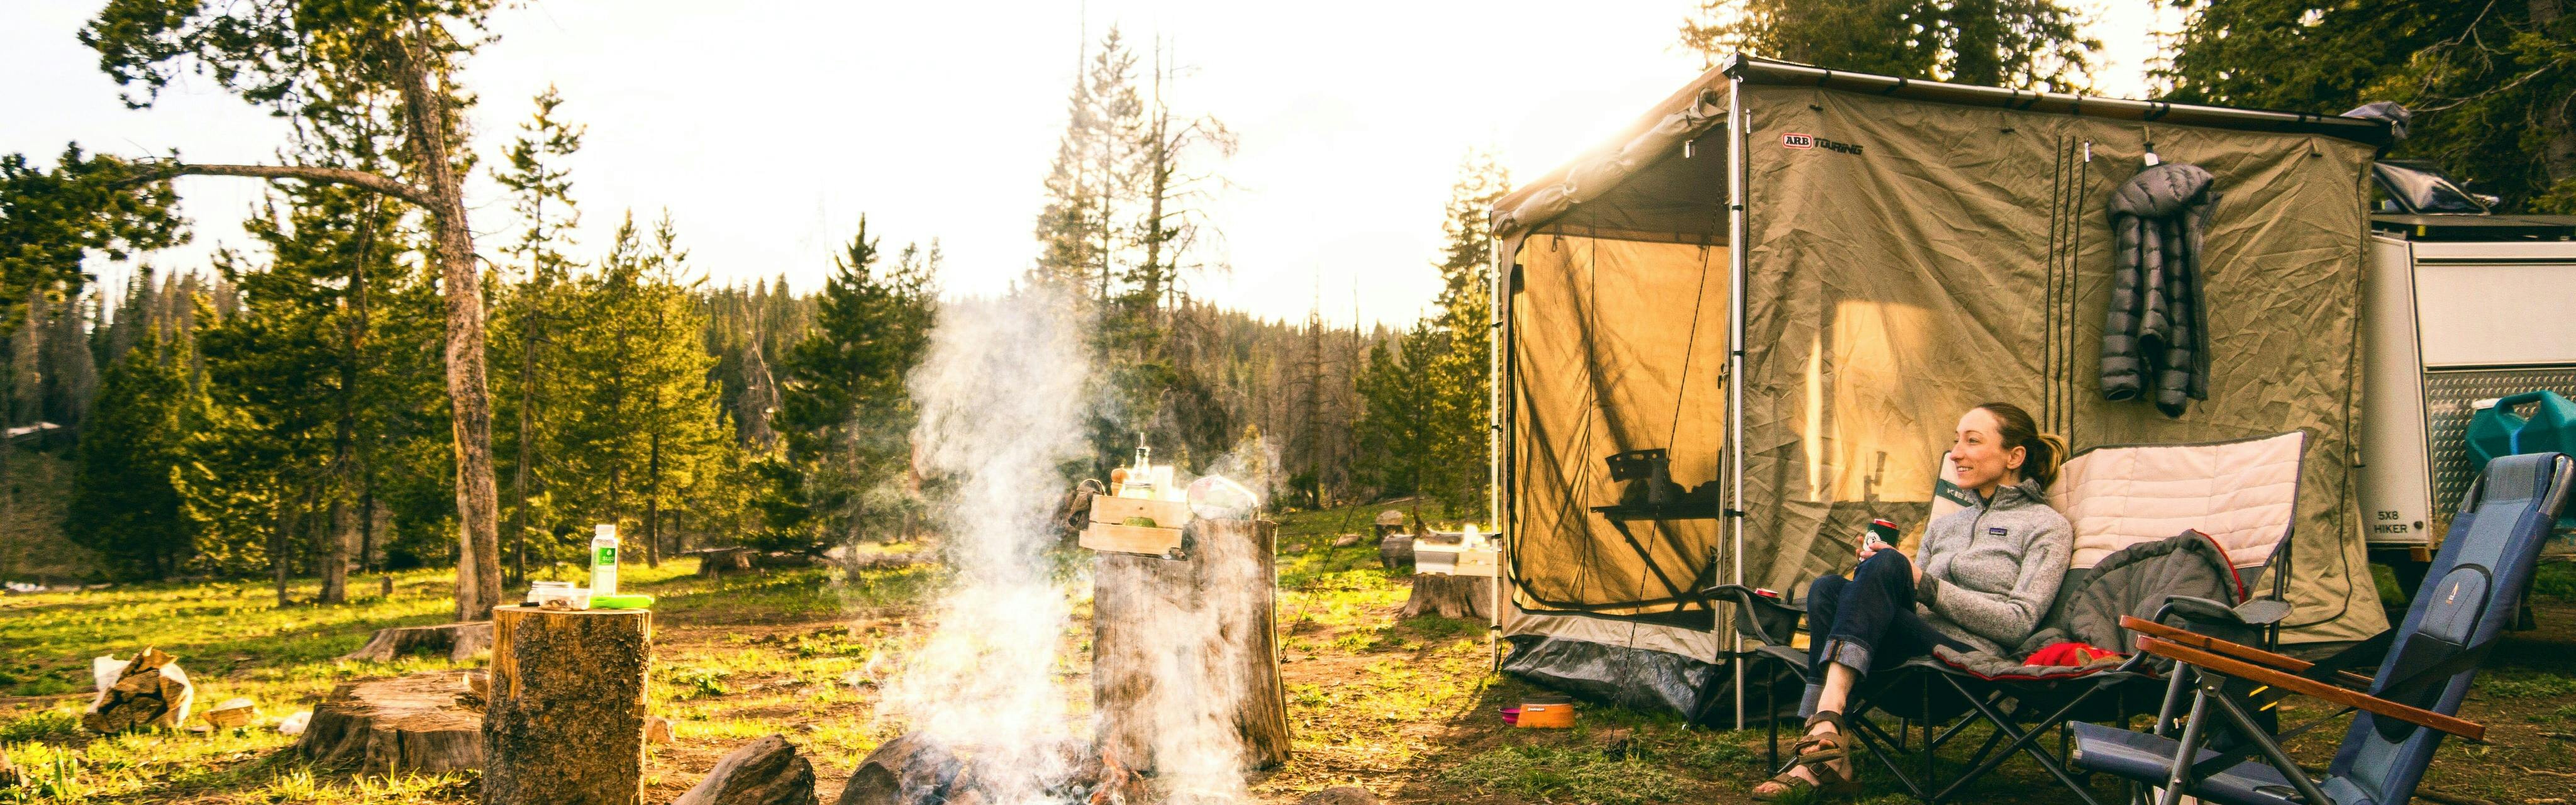 A woman sitting by her tent in front of a fire at a campsite in the afternoon.